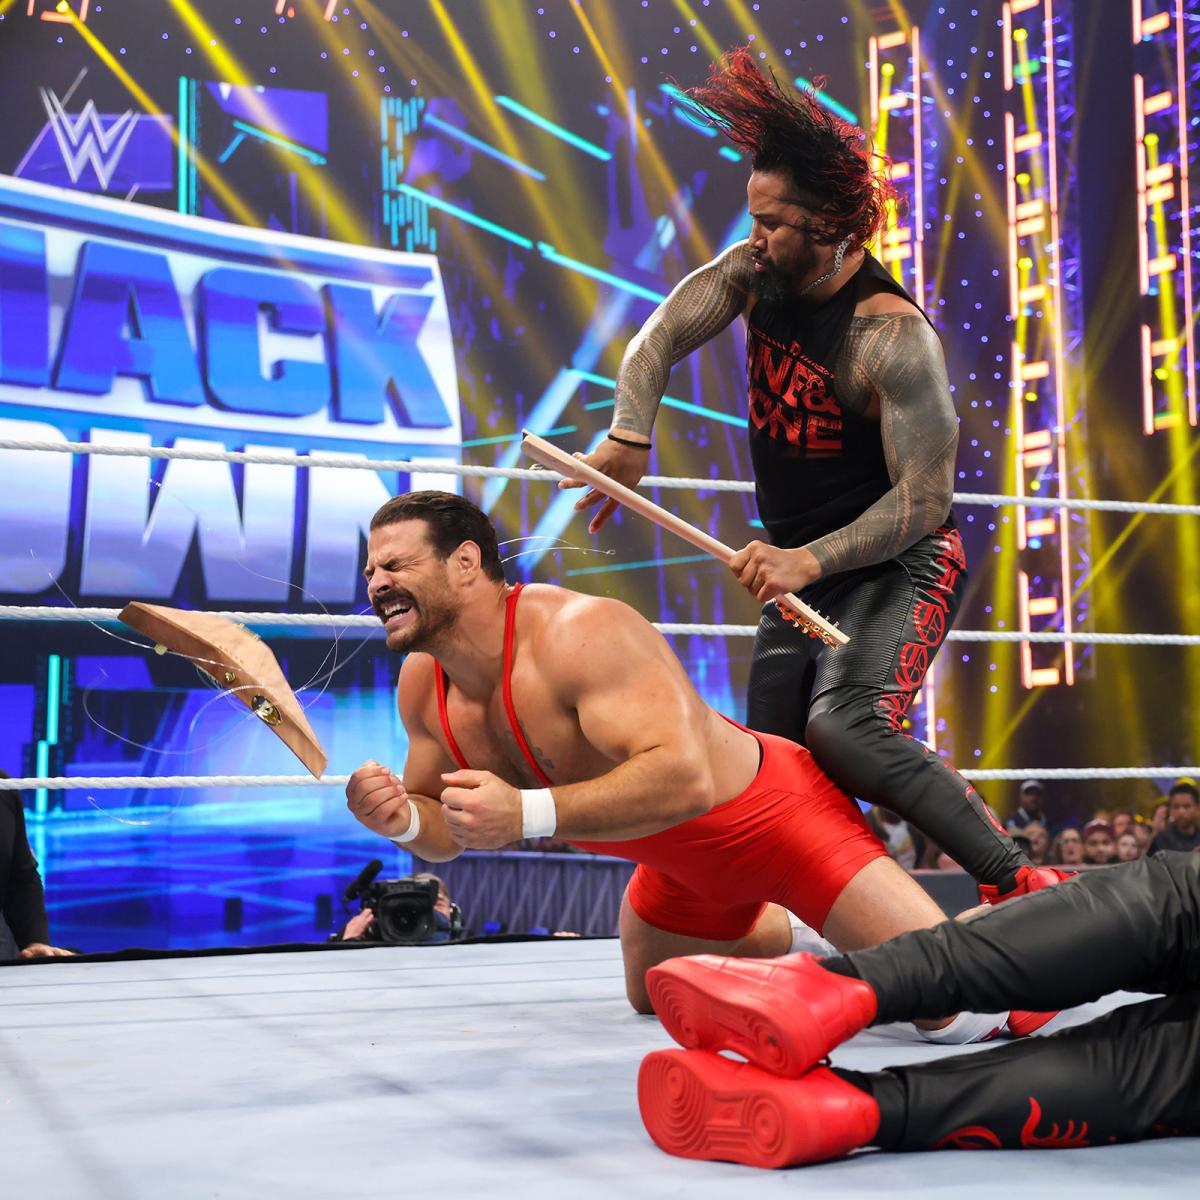 WWE Wrestlemania 38- The Usos set to defend their Smackdown tag-team titles at Wrestlemania 38, check which team they will be facing